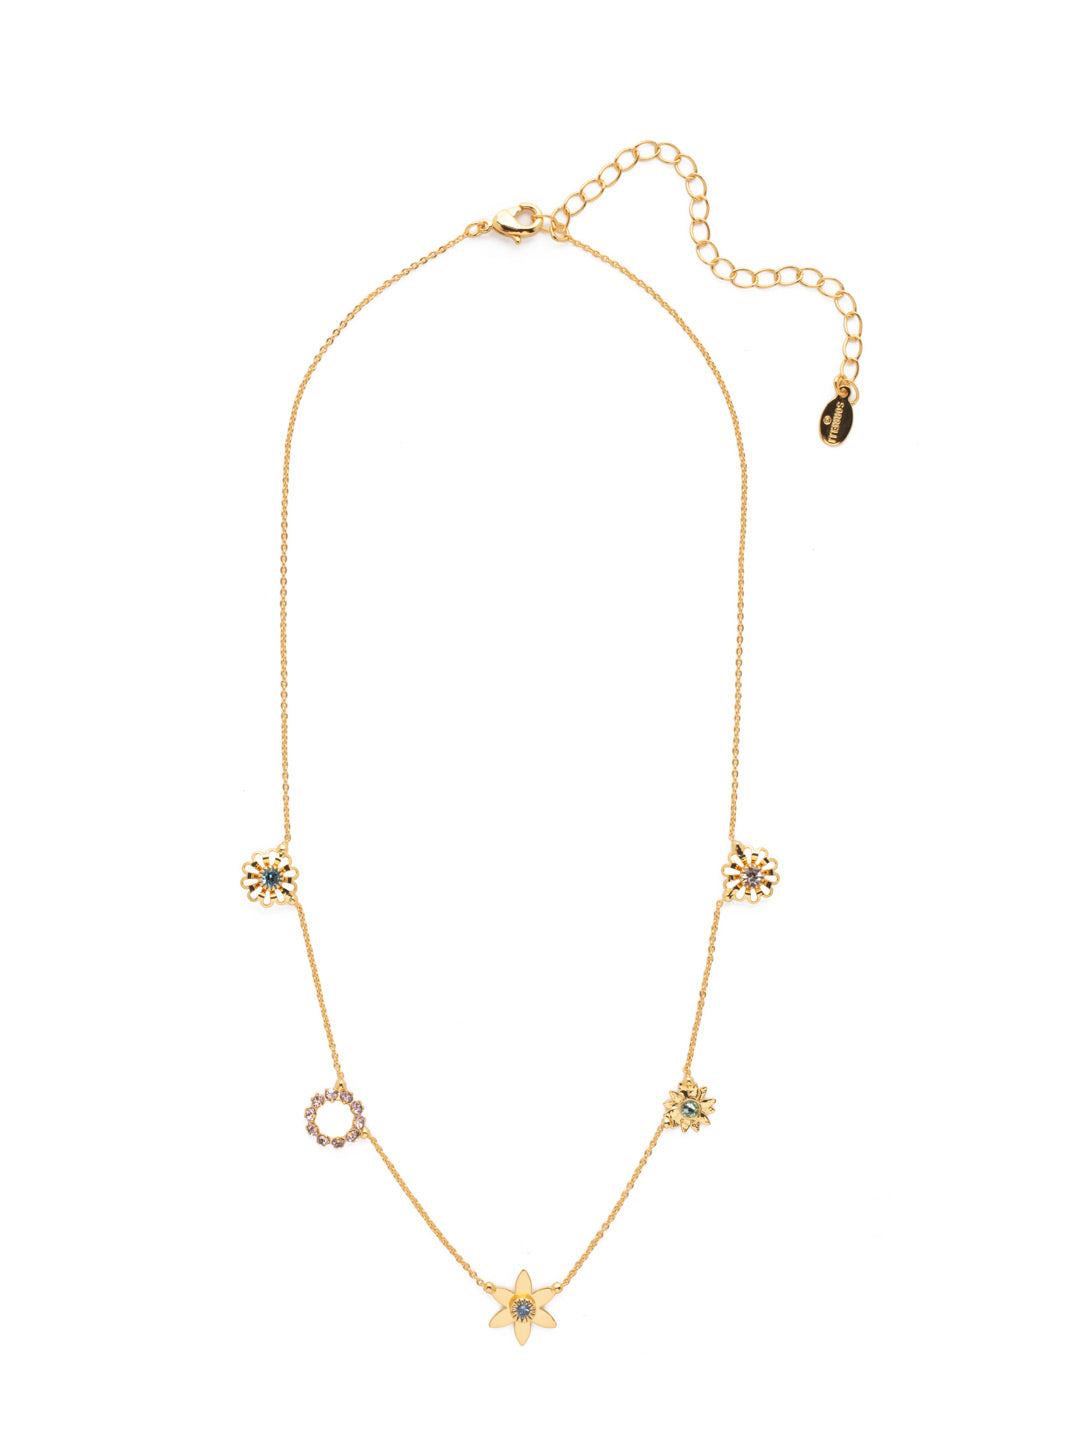 Normani Tennis Necklace - NEV1BGSPR - <p>The Normani Tennis Necklace features a delicate chain dotted with floral charm pieces and sparkling Sorrelli crystals, too. From Sorrelli's Spring Rain collection in our Bright Gold-tone finish.</p>